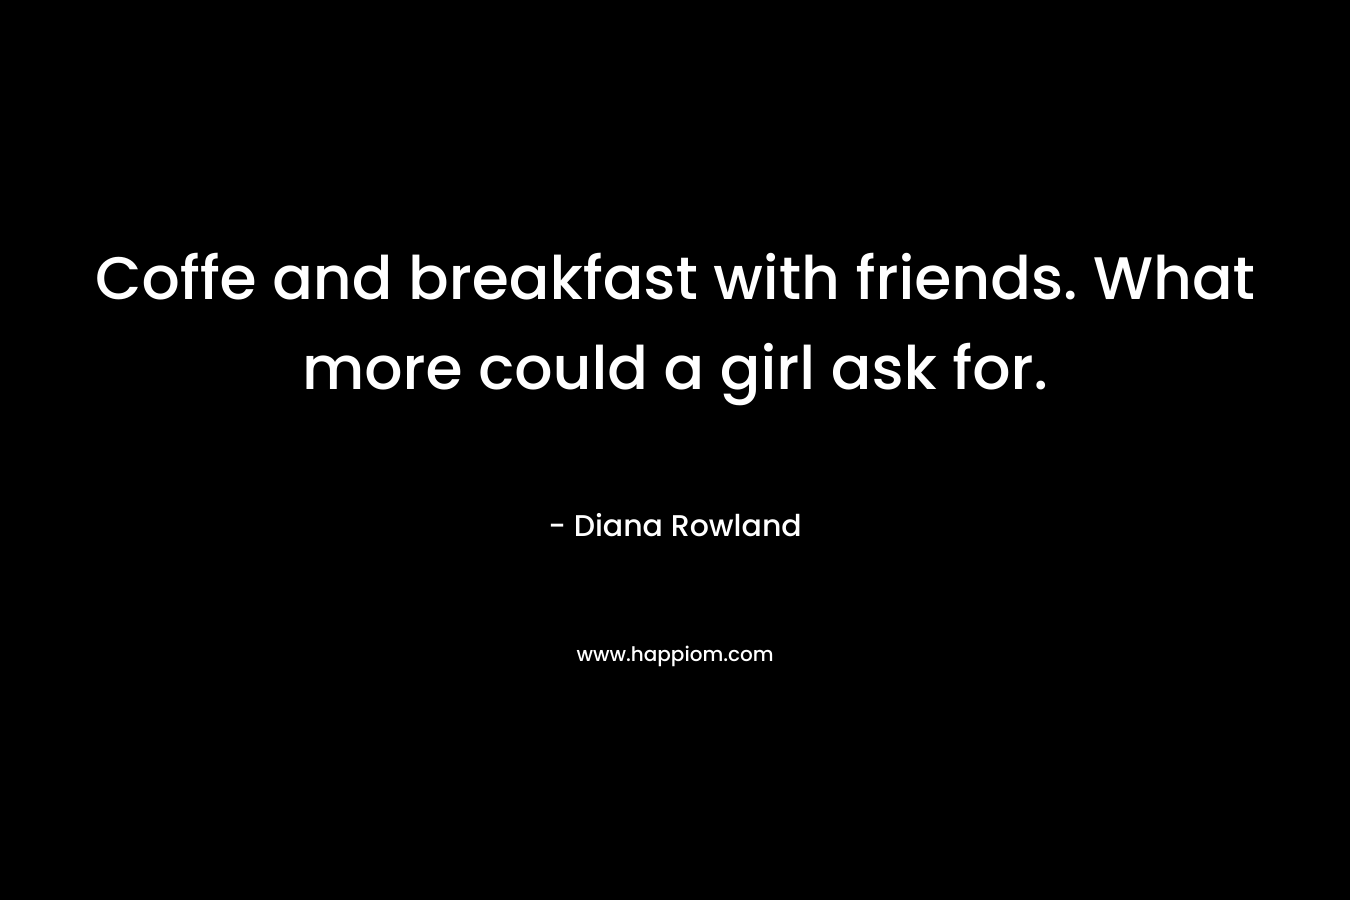 Coffe and breakfast with friends. What more could a girl ask for. – Diana Rowland